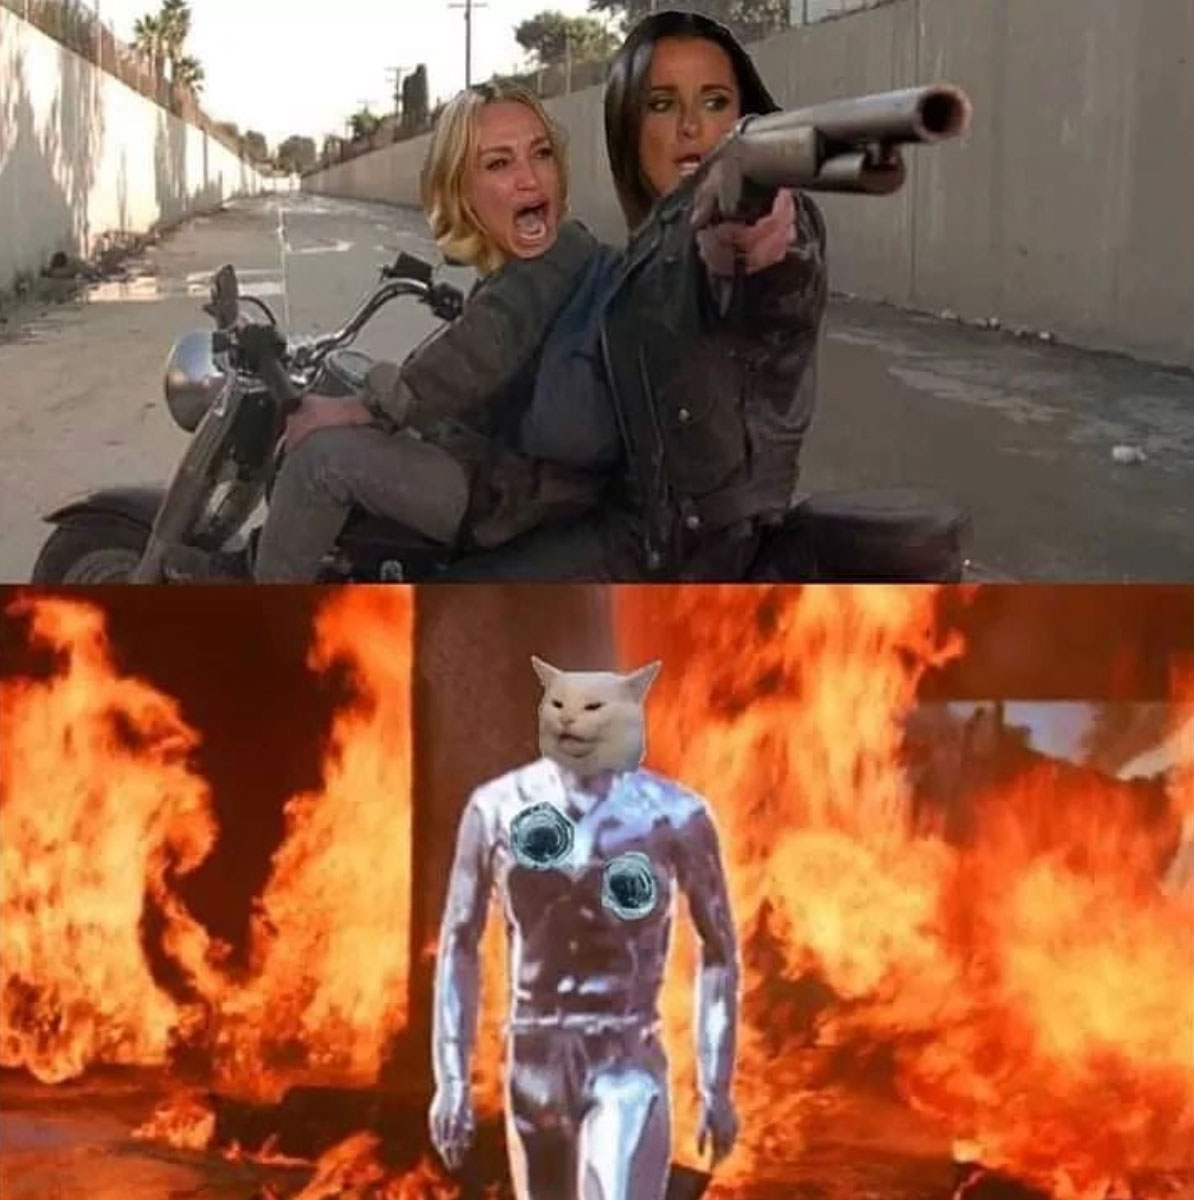 Terminator 2 - woman yelling at a cat meme where the cat is the liquid metal t-1000